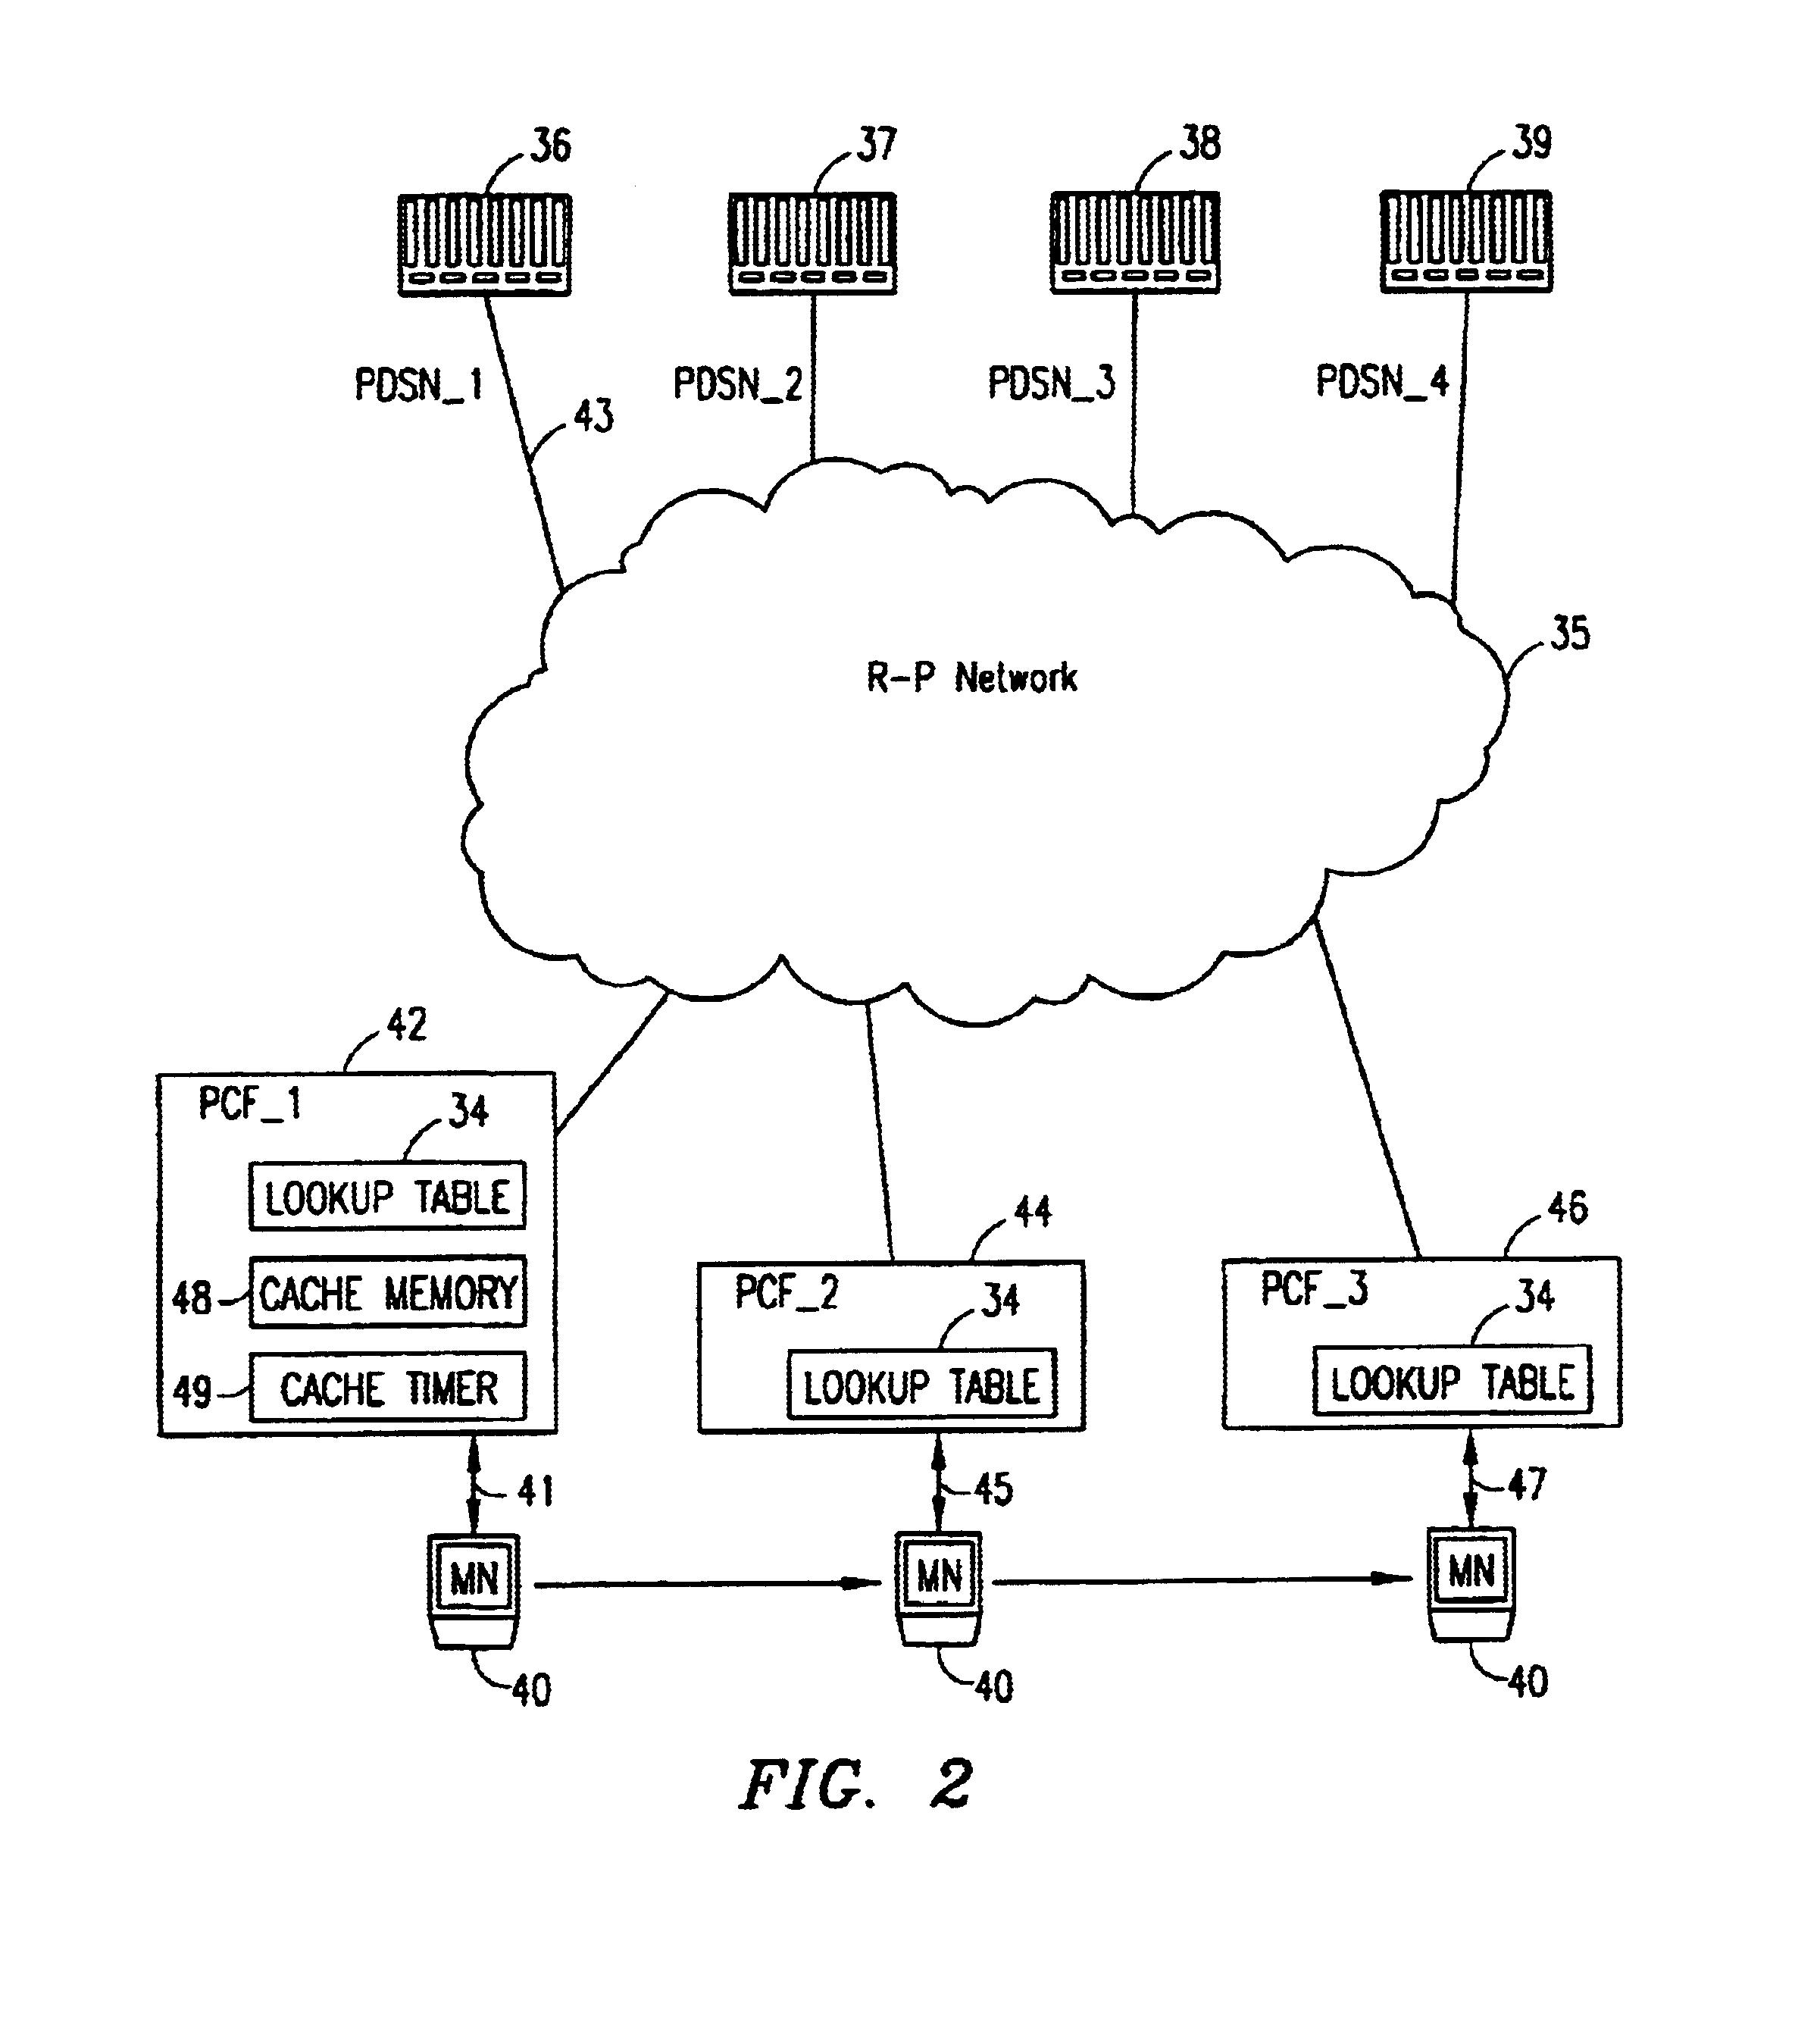 Packet core function and method of selecting a packet data service node/foreign agent in a packet data network